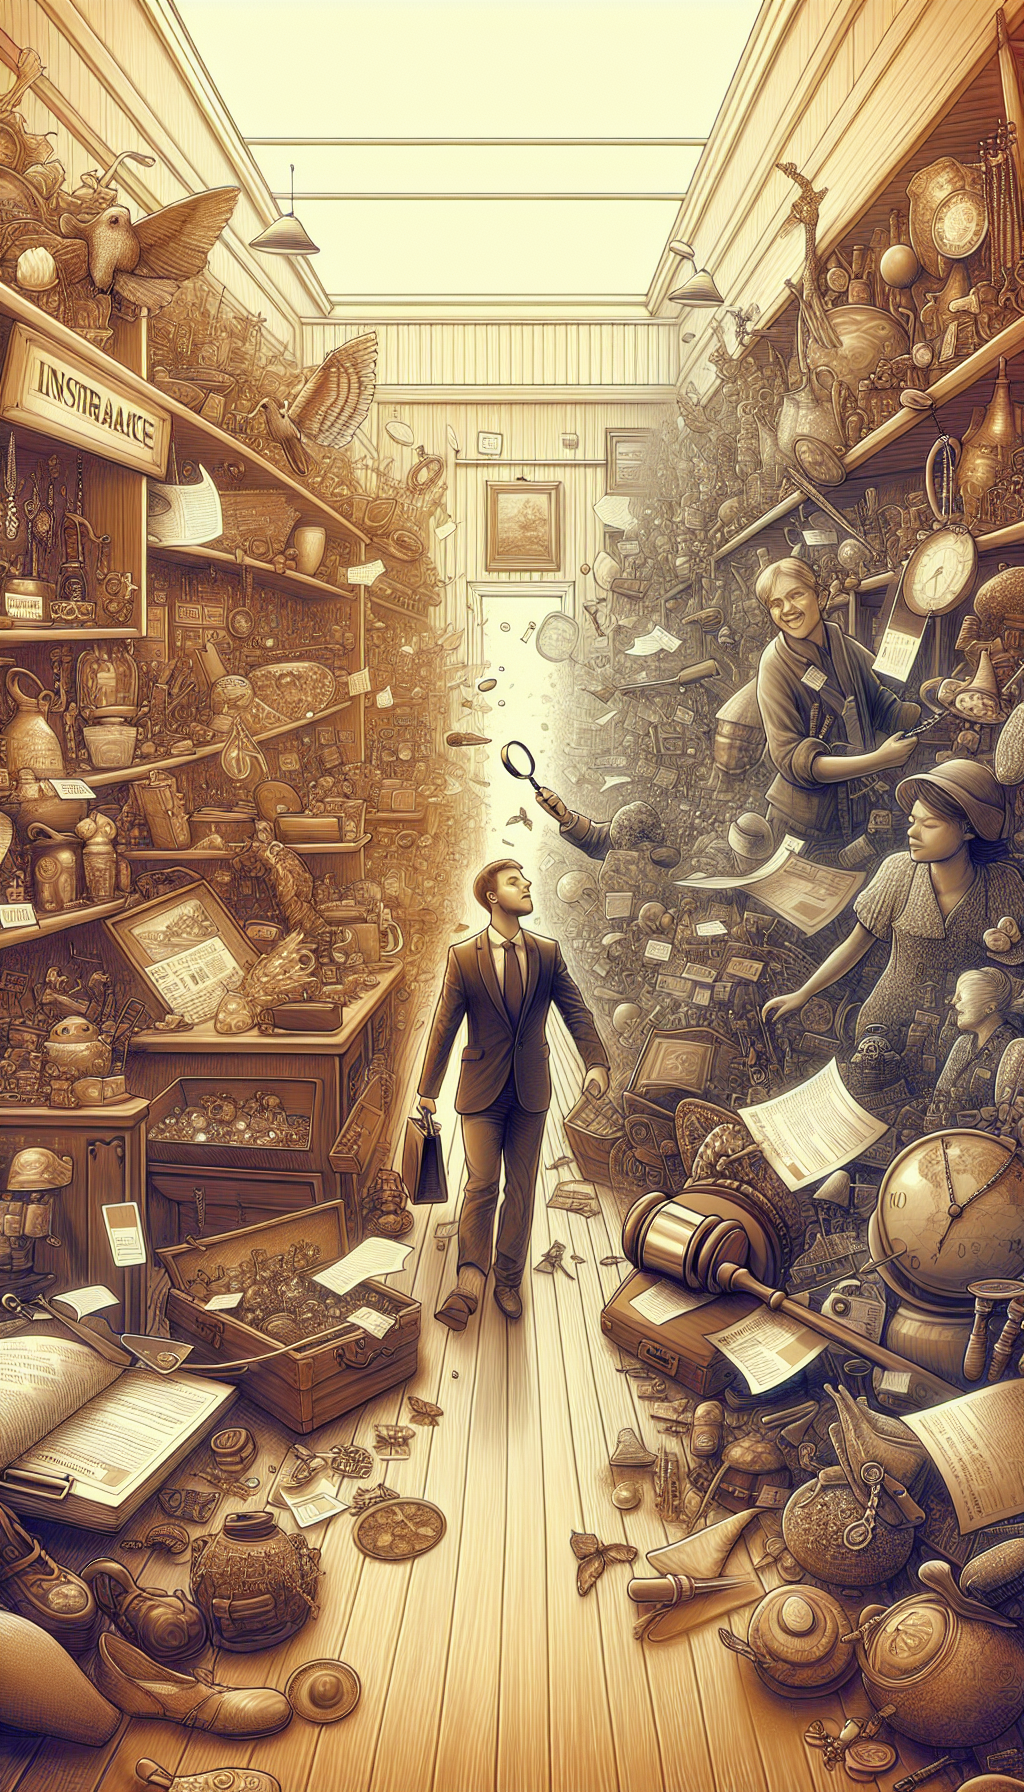 An illustration presents a whimsically cluttered antique shop, where a shopper navigates through a maze of collectibles, guided by price tags and insurance certificates doubling as stepping stones. In the background, an appraiser with a magnifying glass and a gavel oversees the labyrinth, signifying the importance of valuation in this market adventure. The styles shift from sepia-toned realism near the appraiser to vibrant, exaggerated caricature by the shop's entrance.